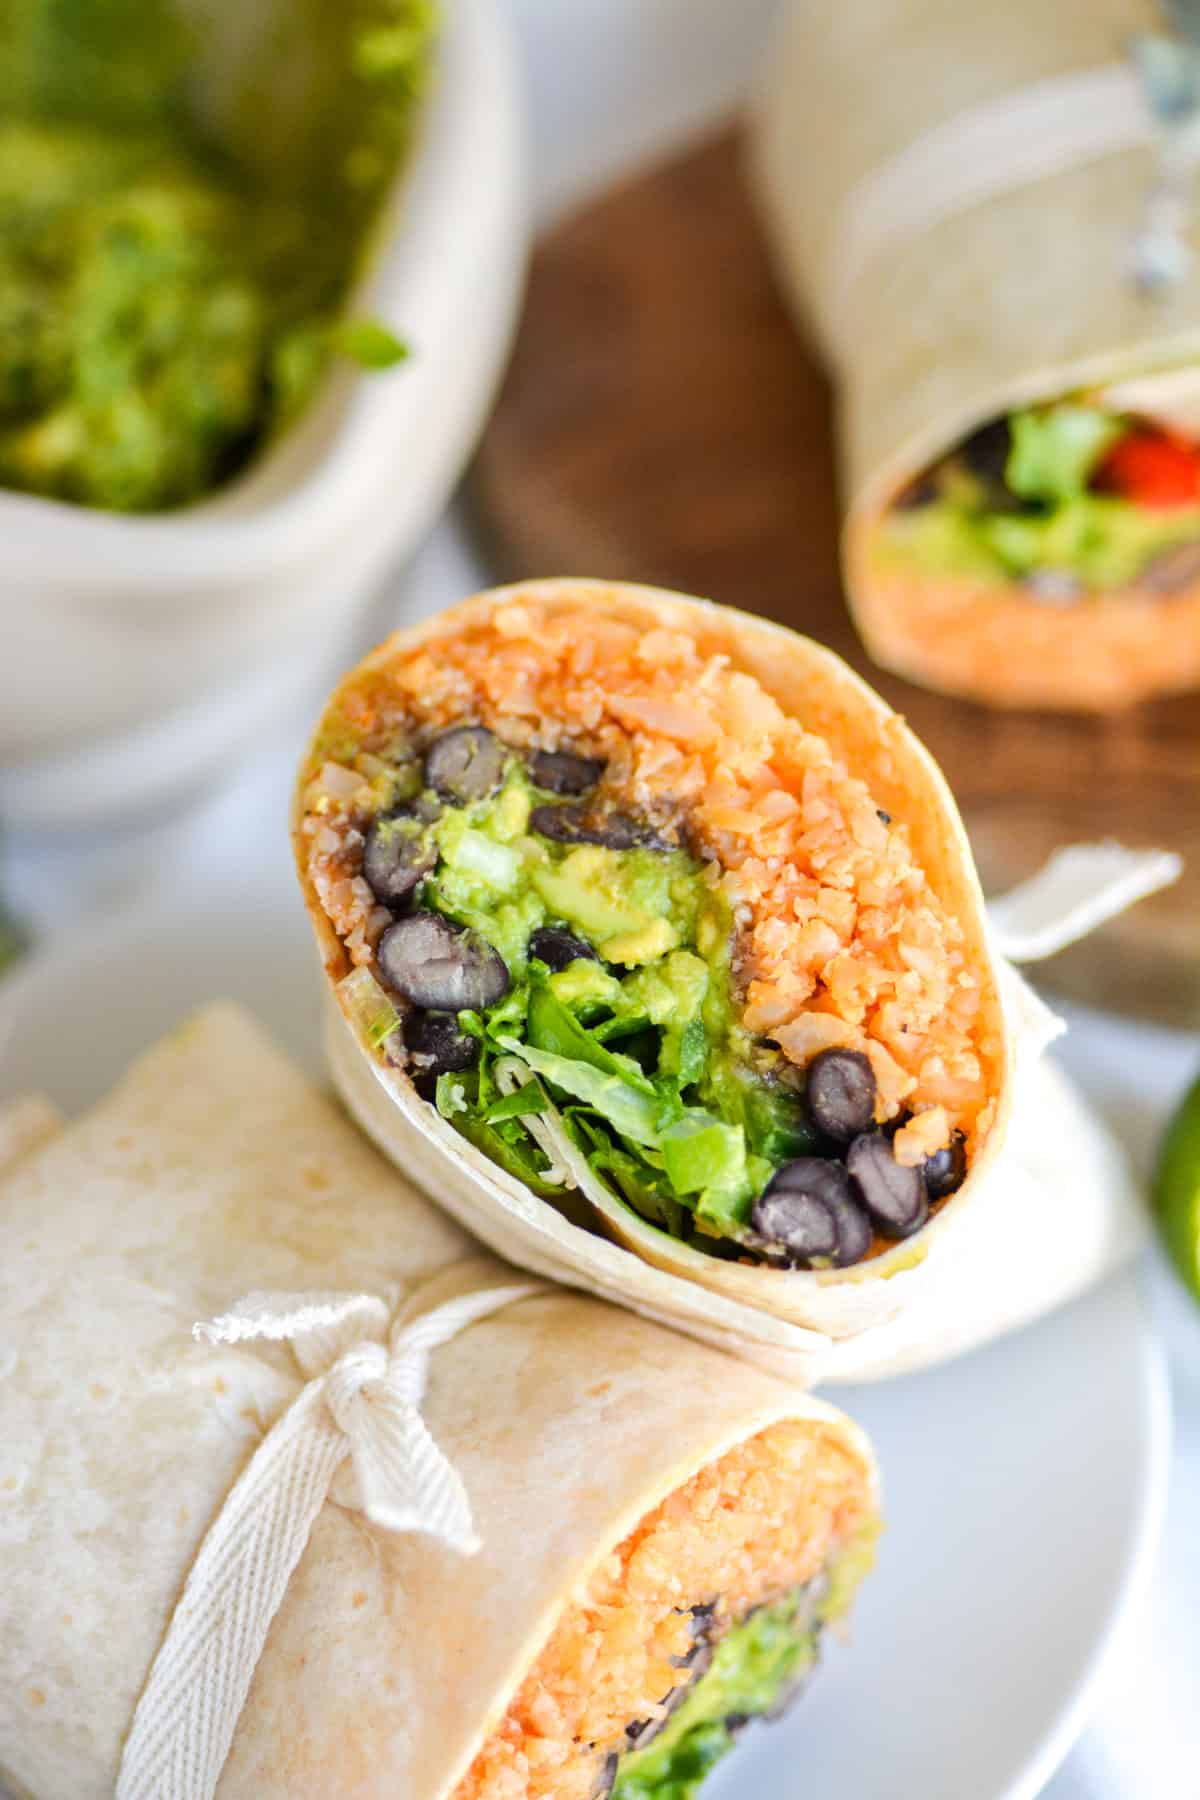 Vegan Black Bean Burrito cut in half to show the inside, leaning on the other half on a small plate.